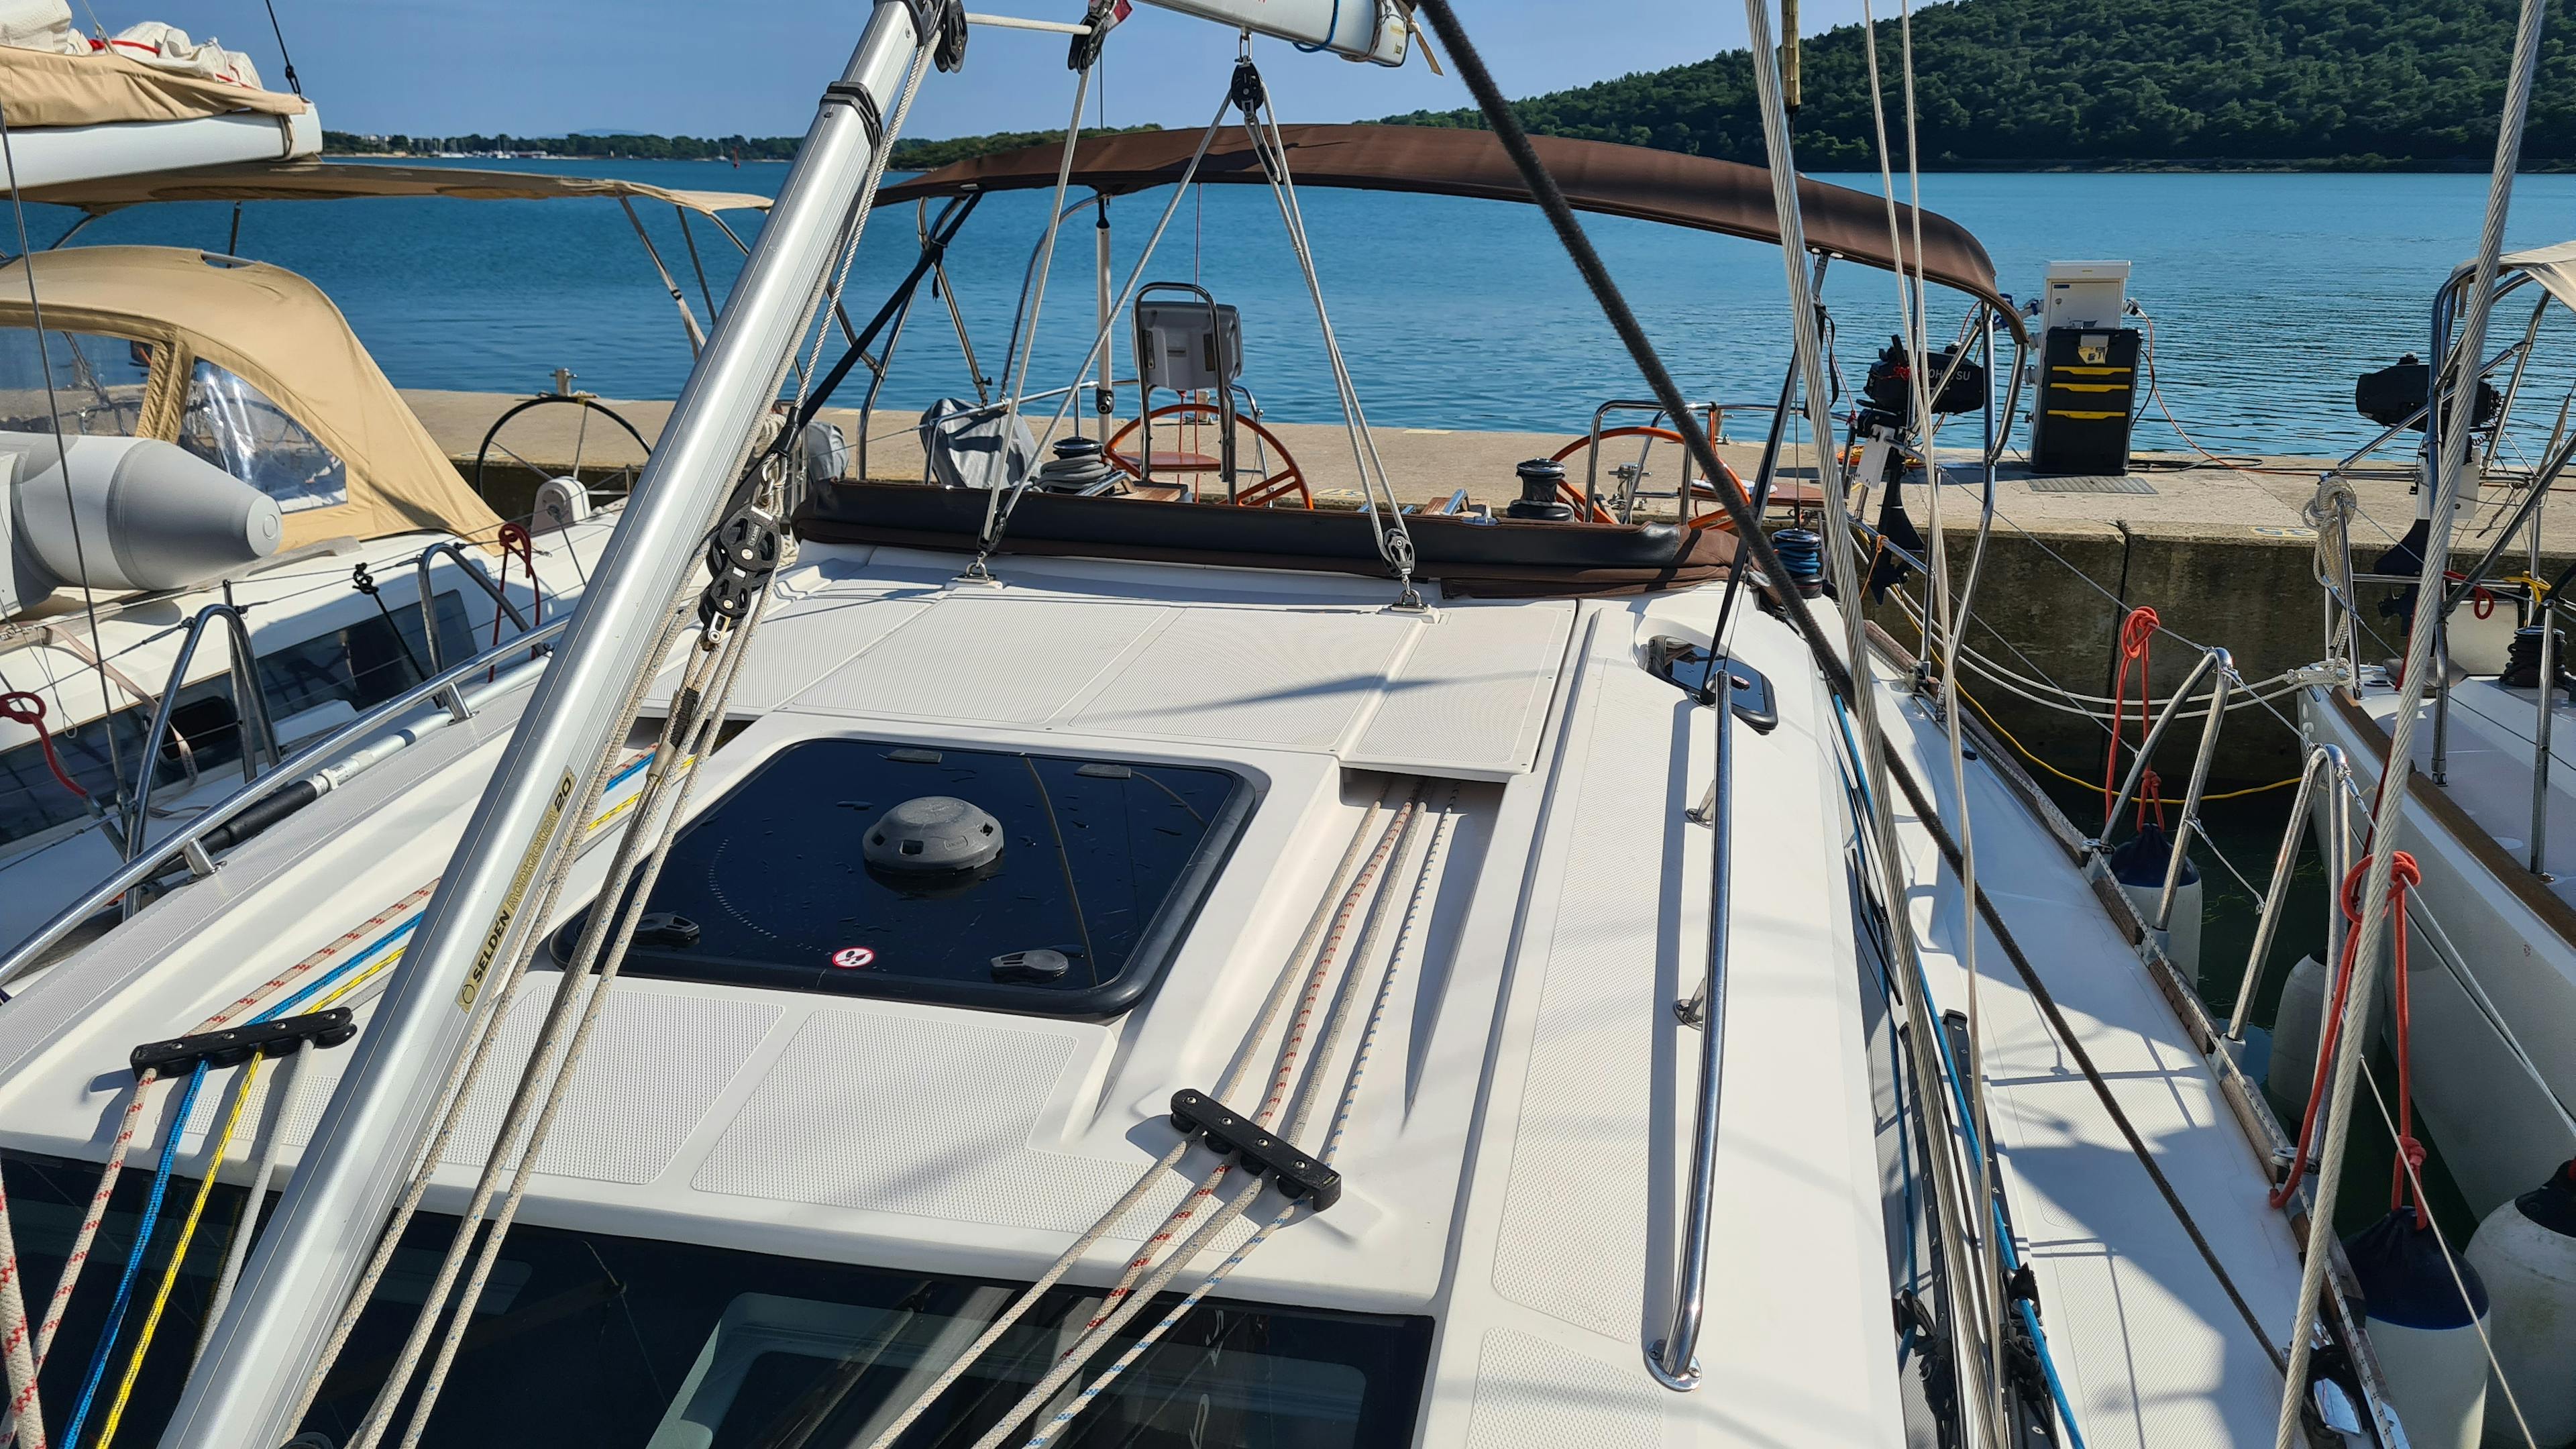 Book Elan Impression 40 Sailing yacht for bareboat charter in Pula, ACI Marina Pomer, Istra, Croatia with TripYacht!, picture 8